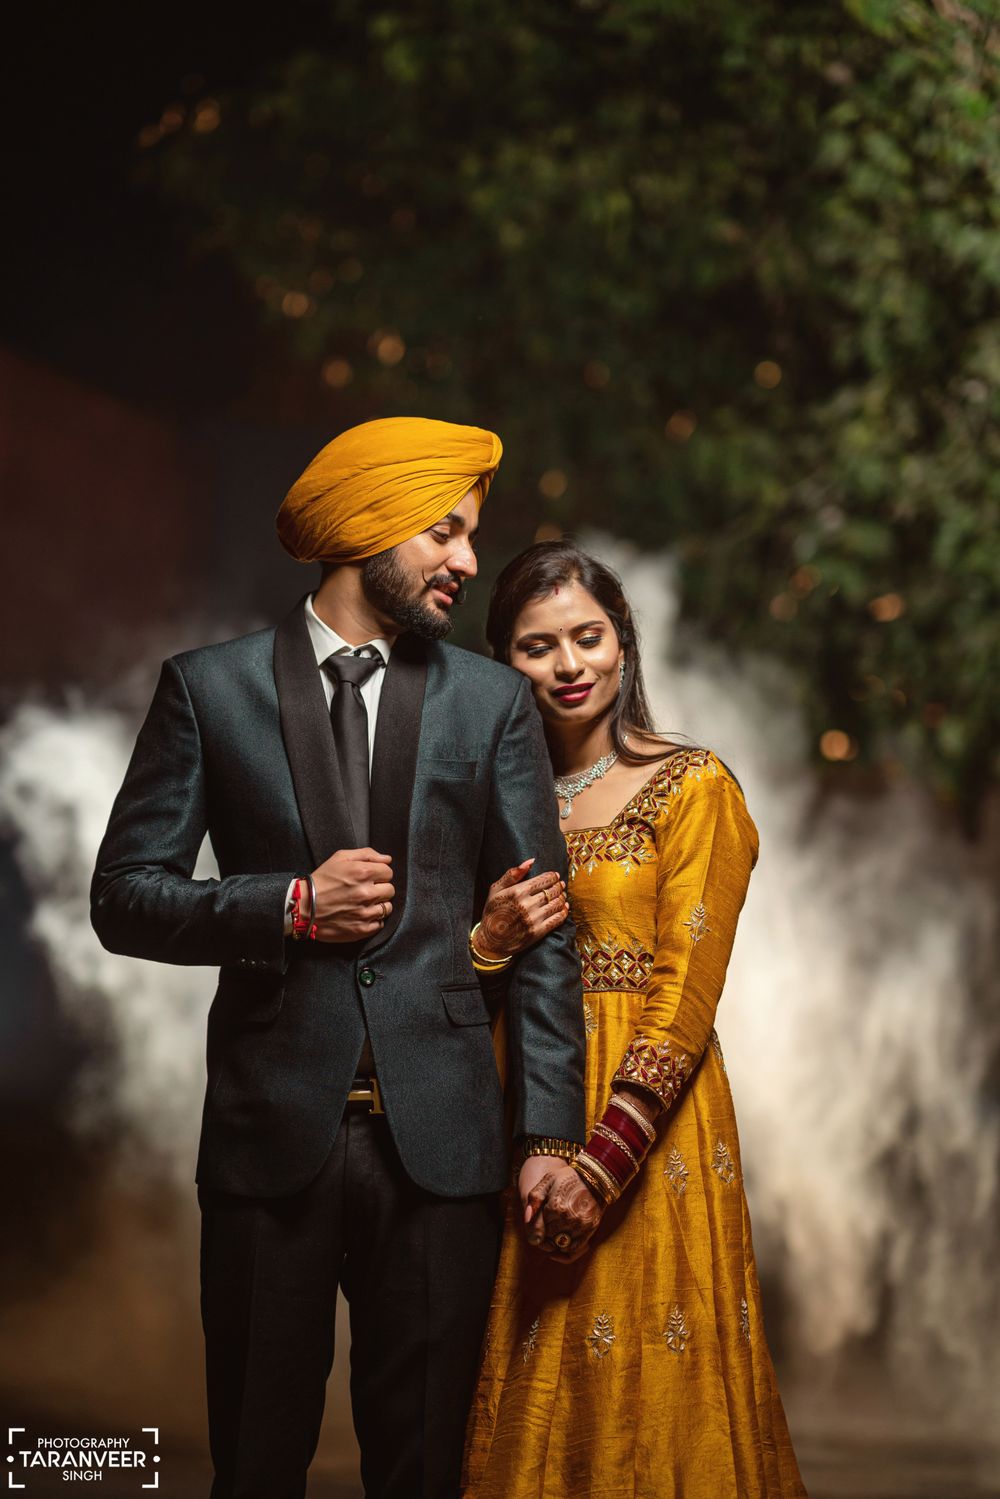 Photo From Taranveer Singh Photography - By Taranveer Singh Photography